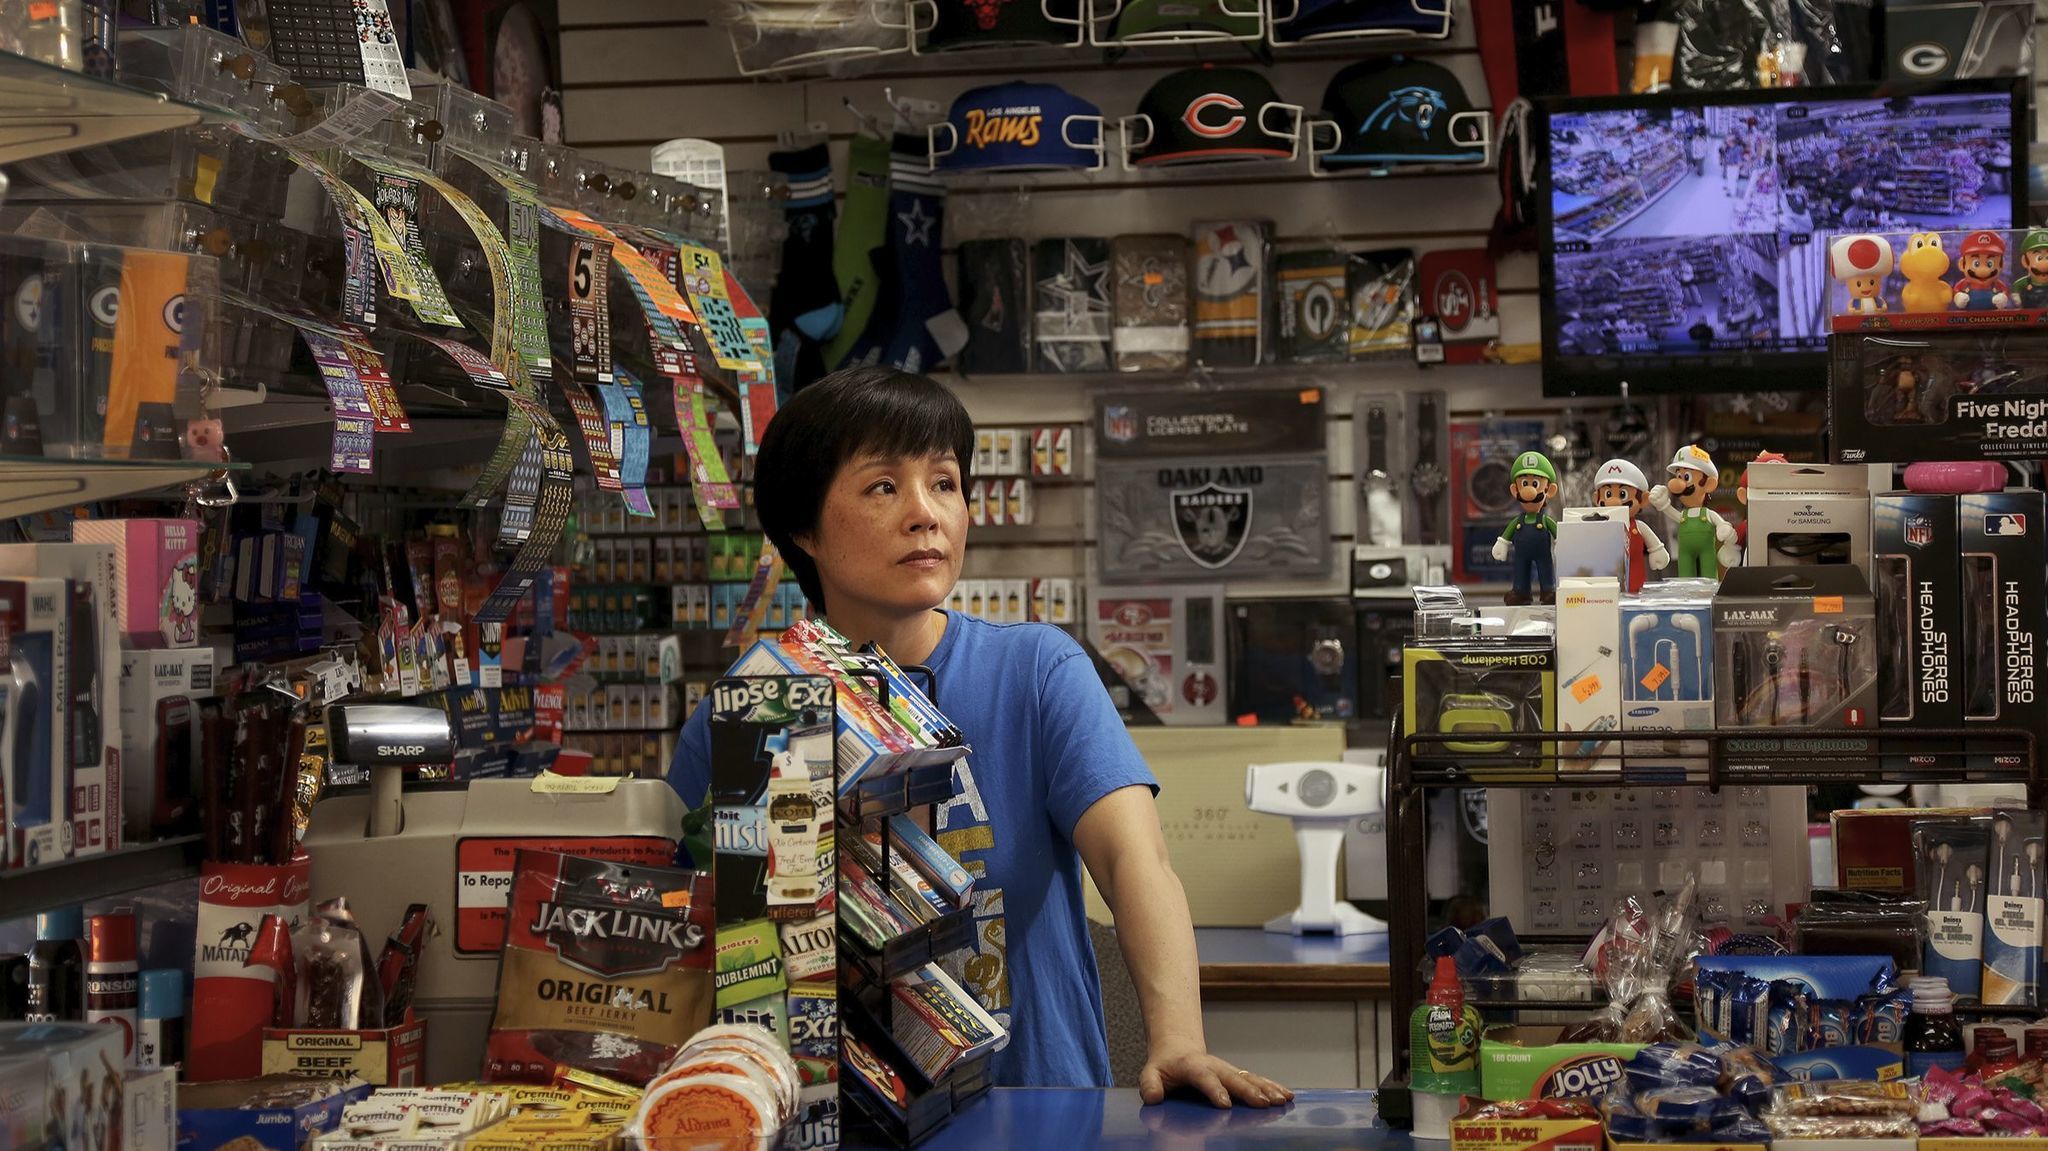 Sue Kim and her husband run a small convenience store along Cesar E. Chavez Avenue in Boyle Heights. The business has been in the family almost 40 years.